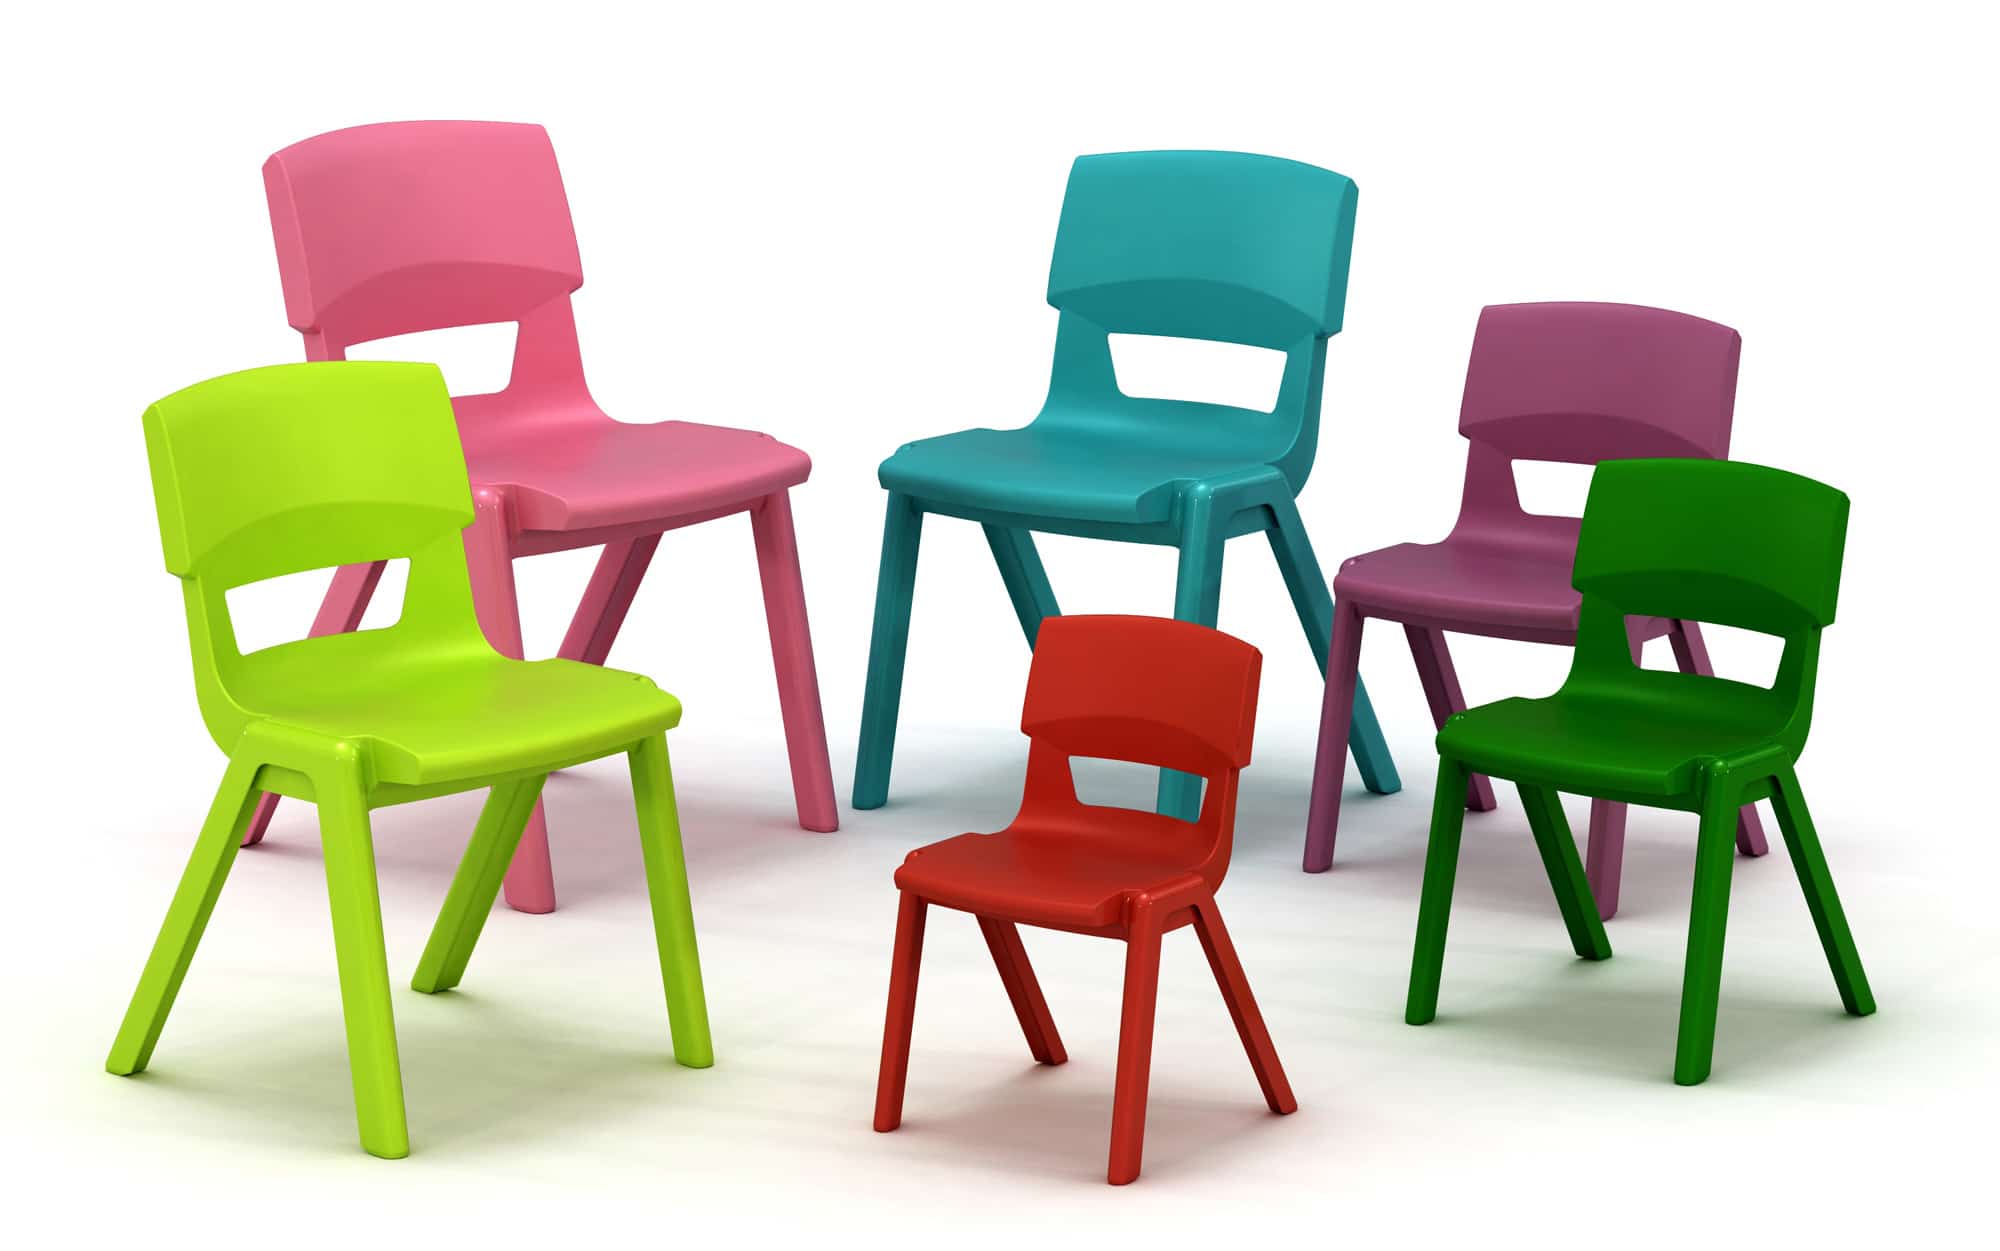 School chairs in different colours